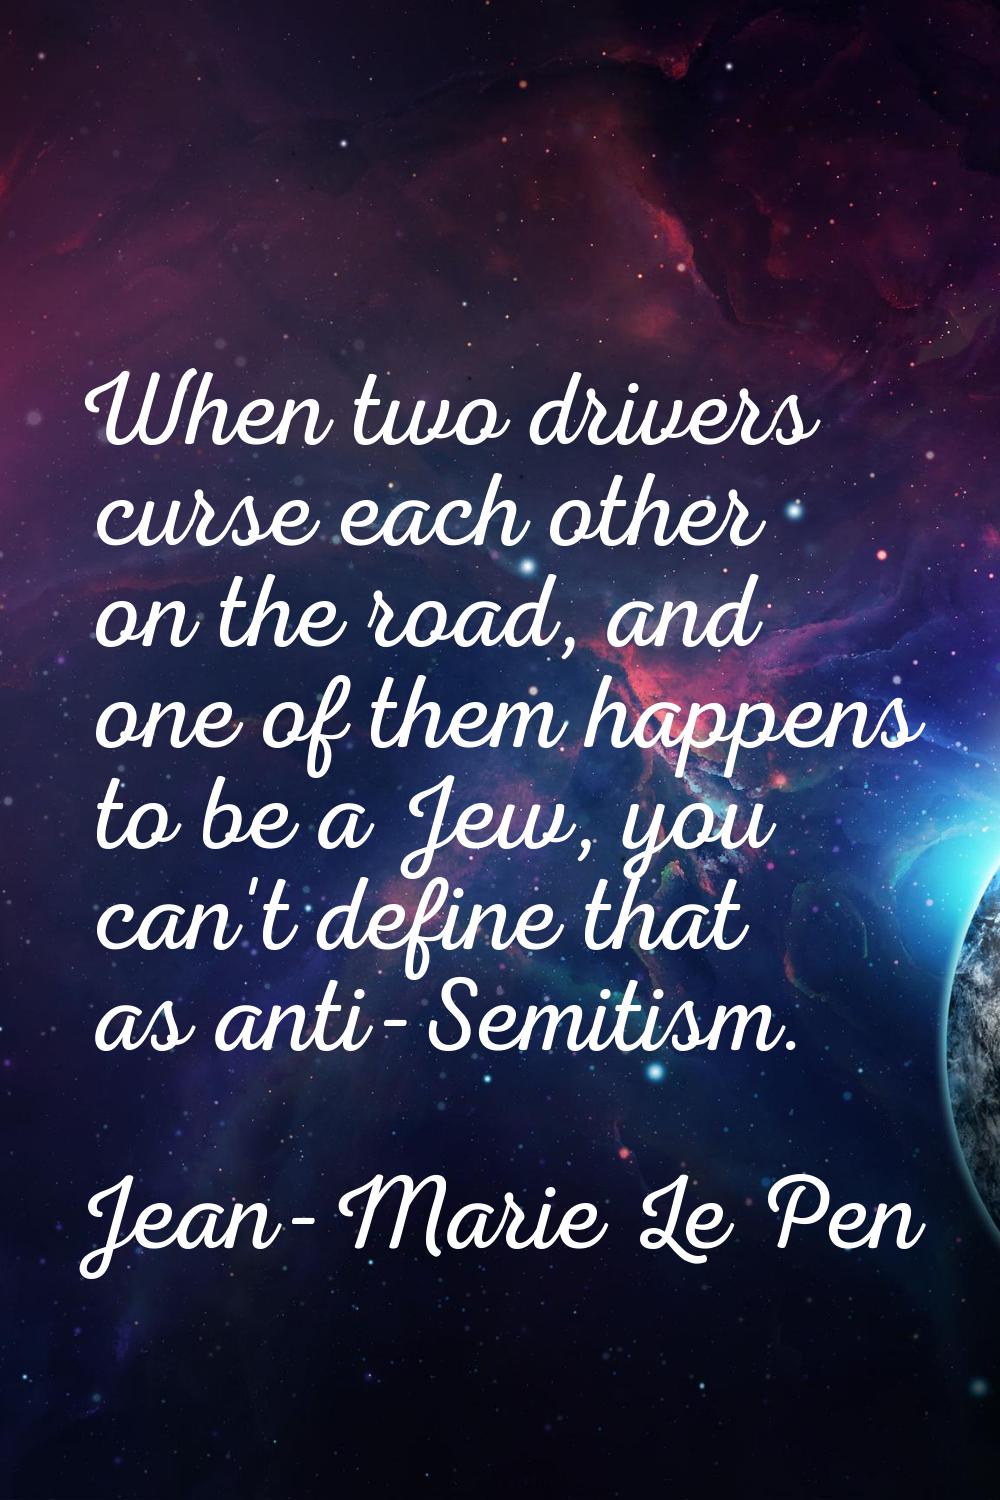 When two drivers curse each other on the road, and one of them happens to be a Jew, you can't defin